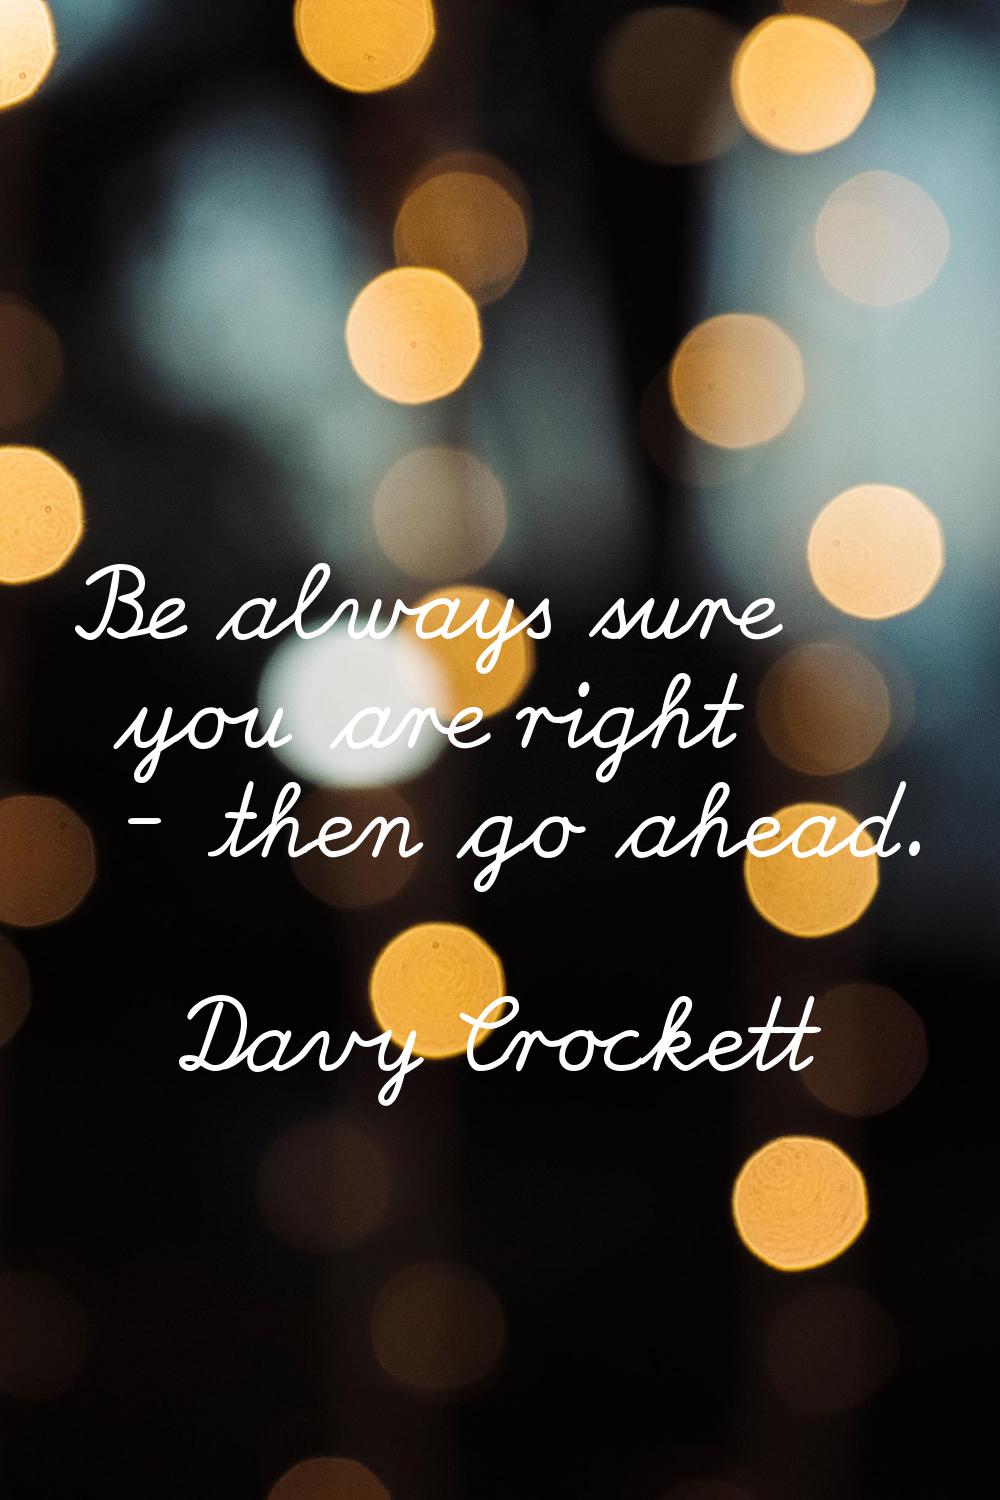 Be always sure you are right - then go ahead.